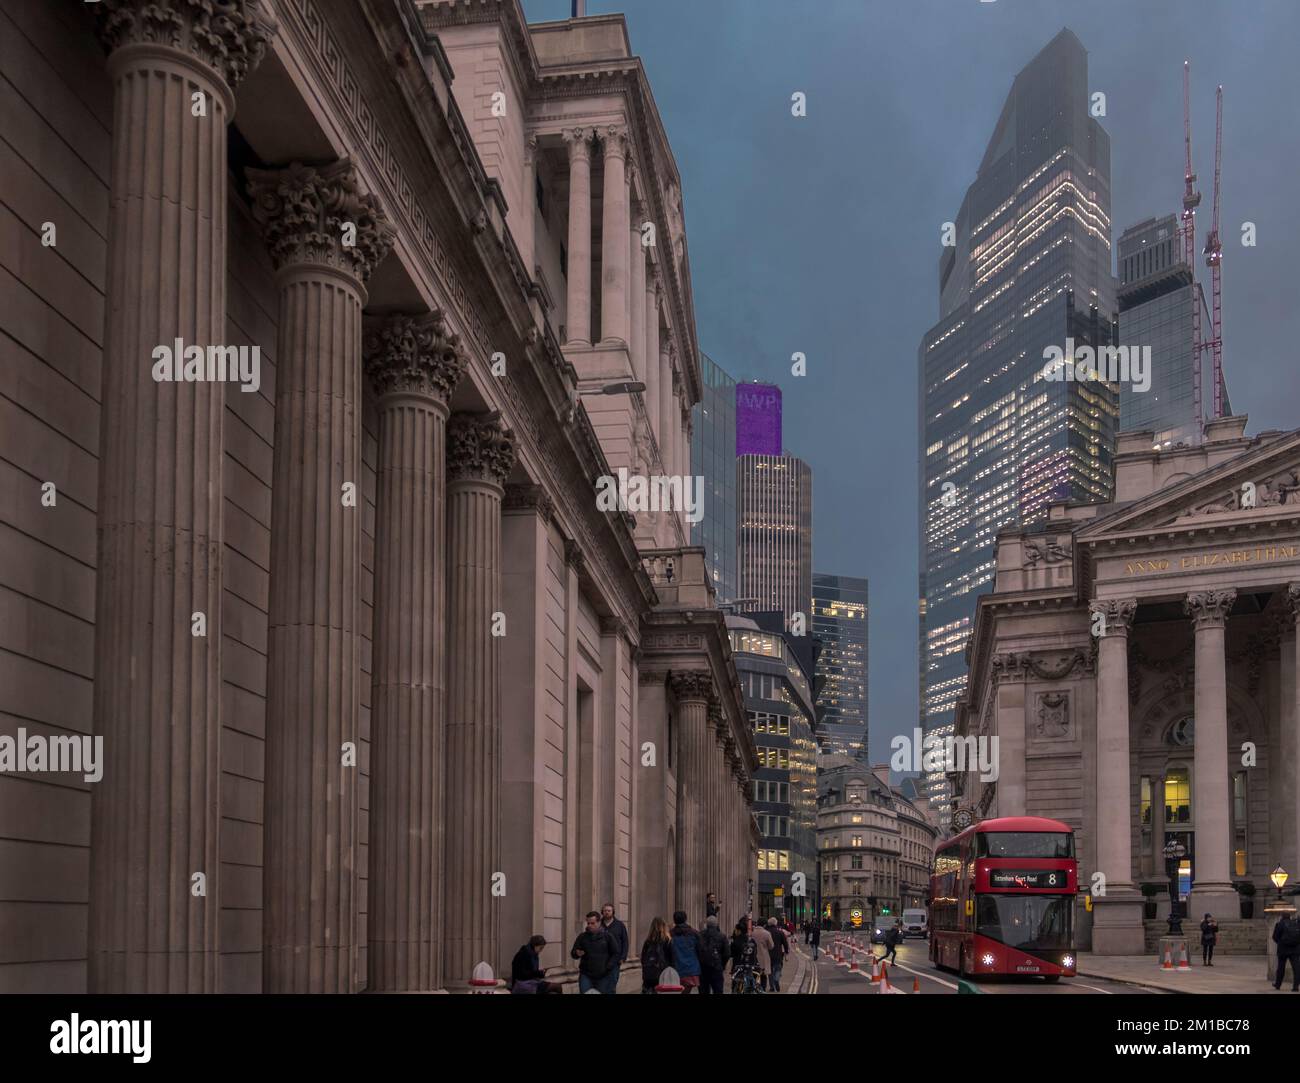 On a murky winter's evening Threadneedle Street looking east towards Bishopsgate at dusk in The City of London. Bank of England (on left). Stock Photo